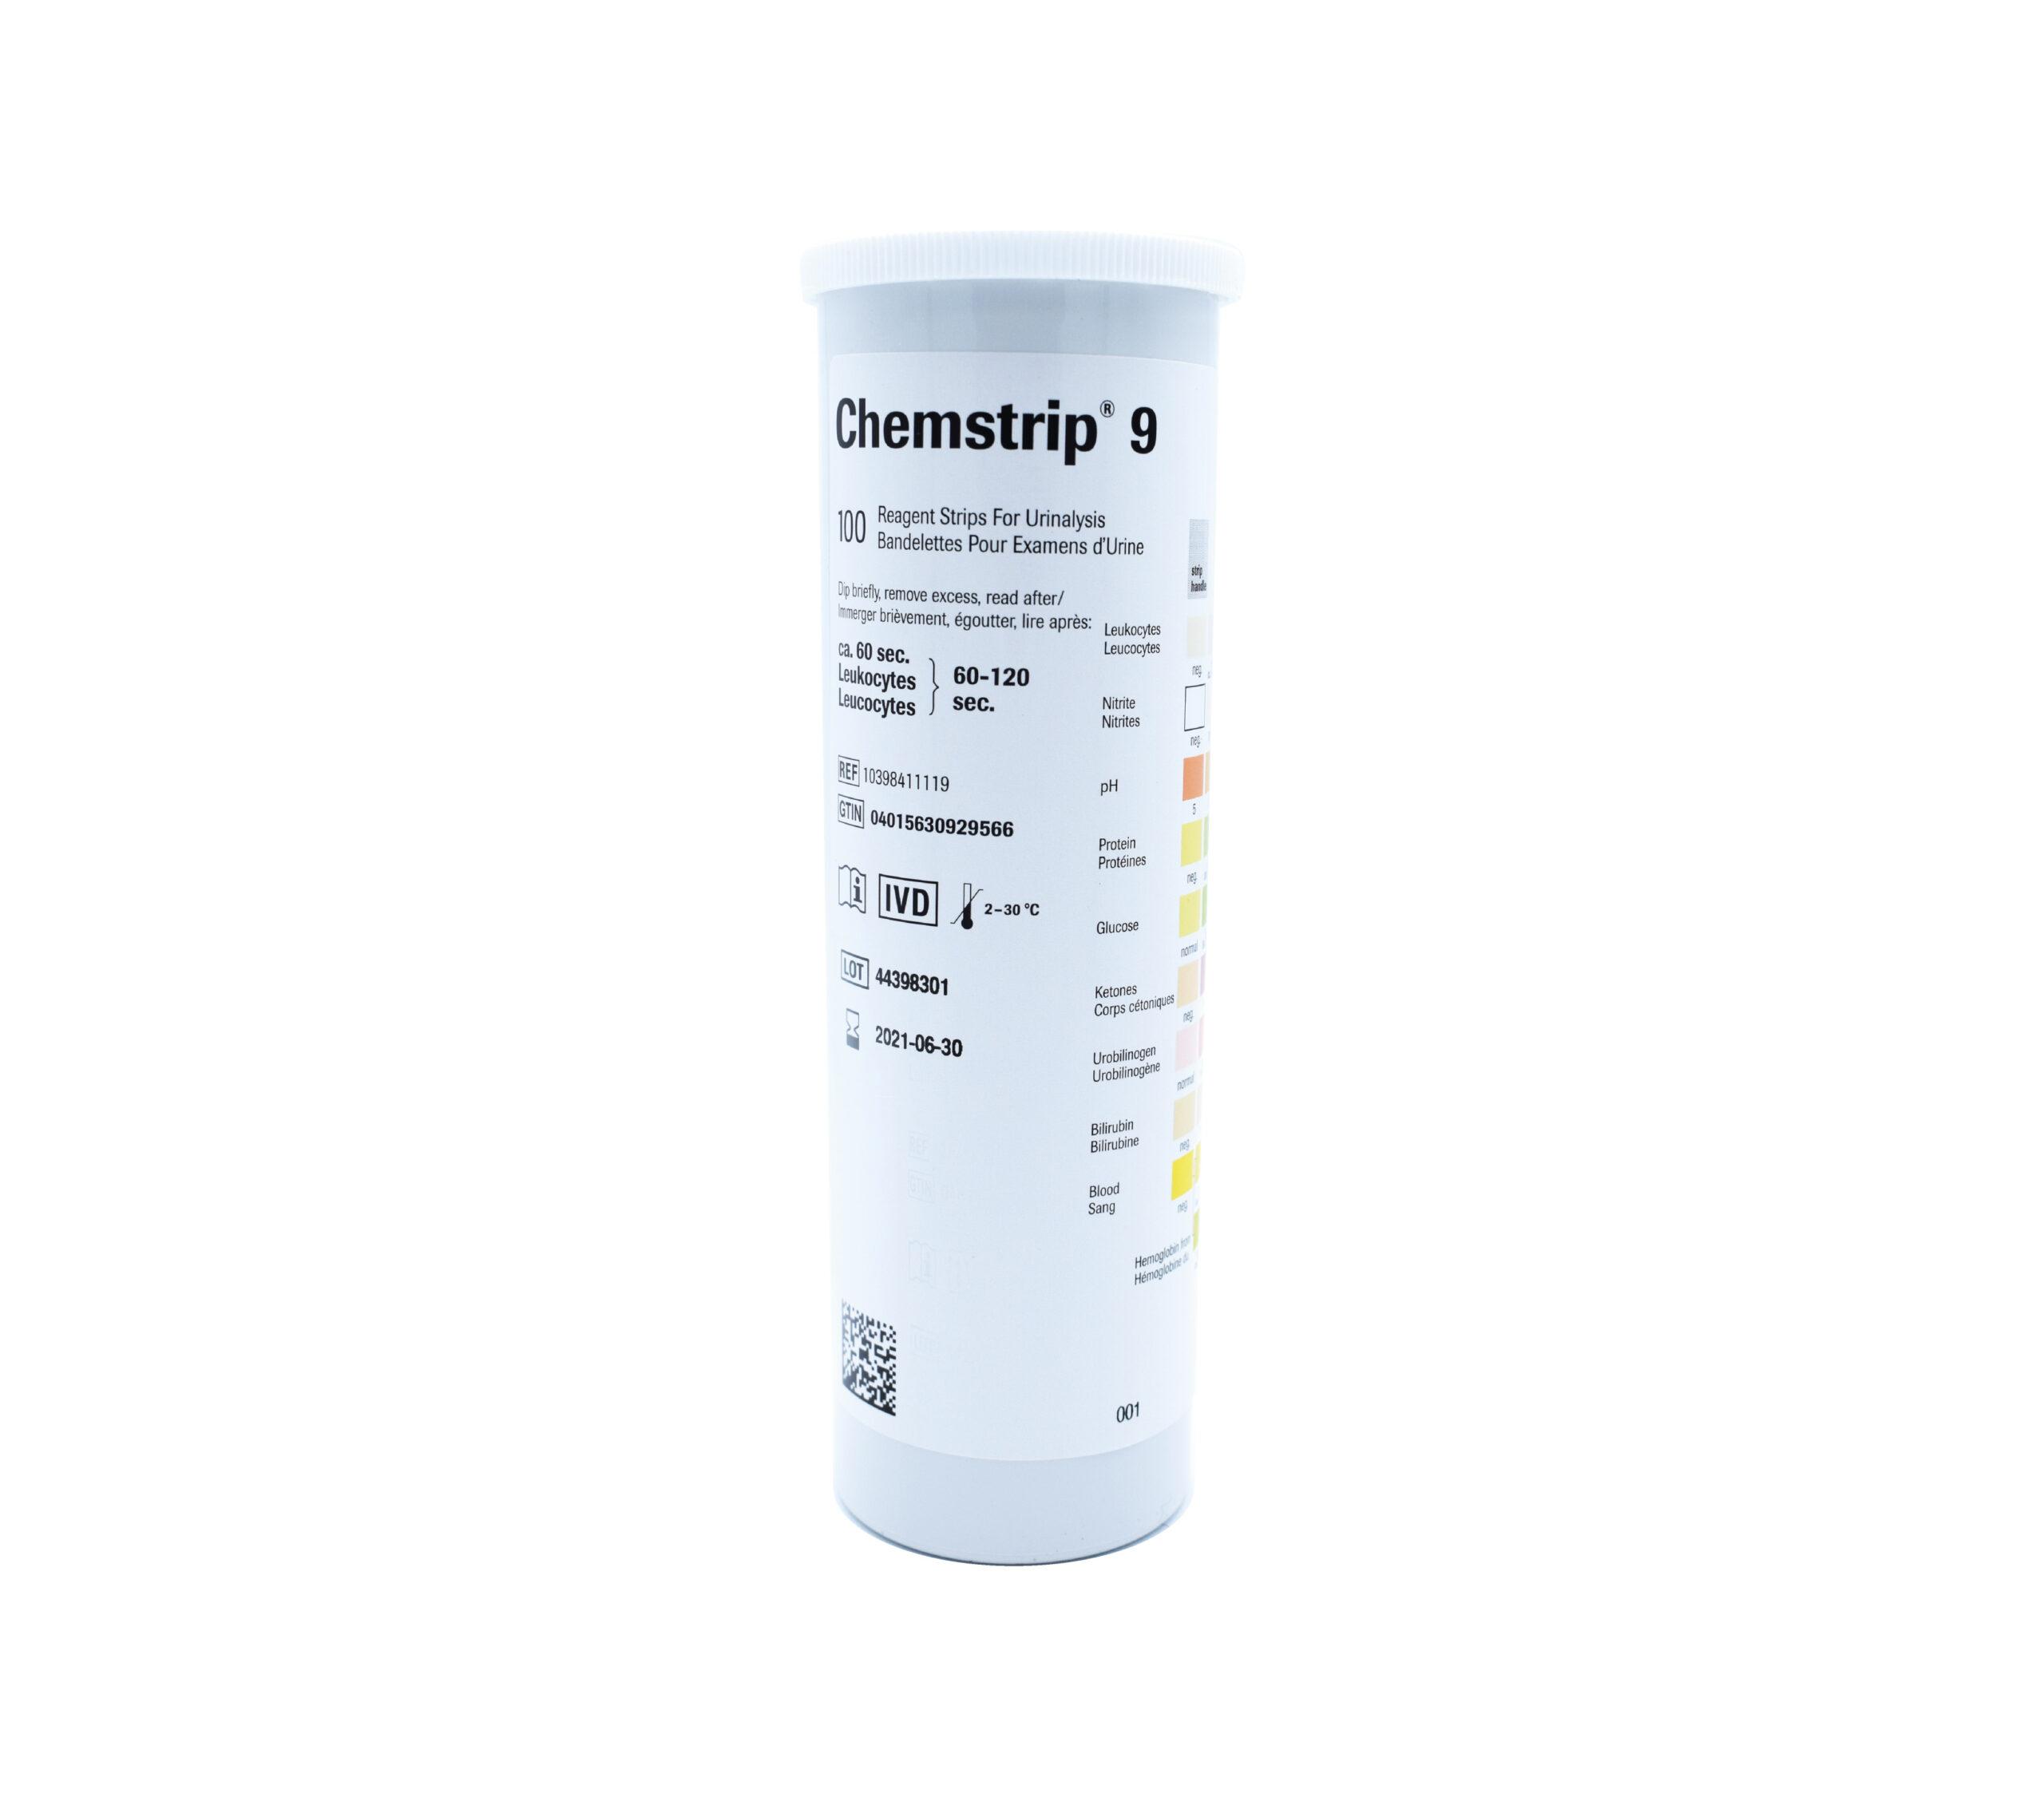 Product Chemstrips® 9 | Sensor Health Sciences image